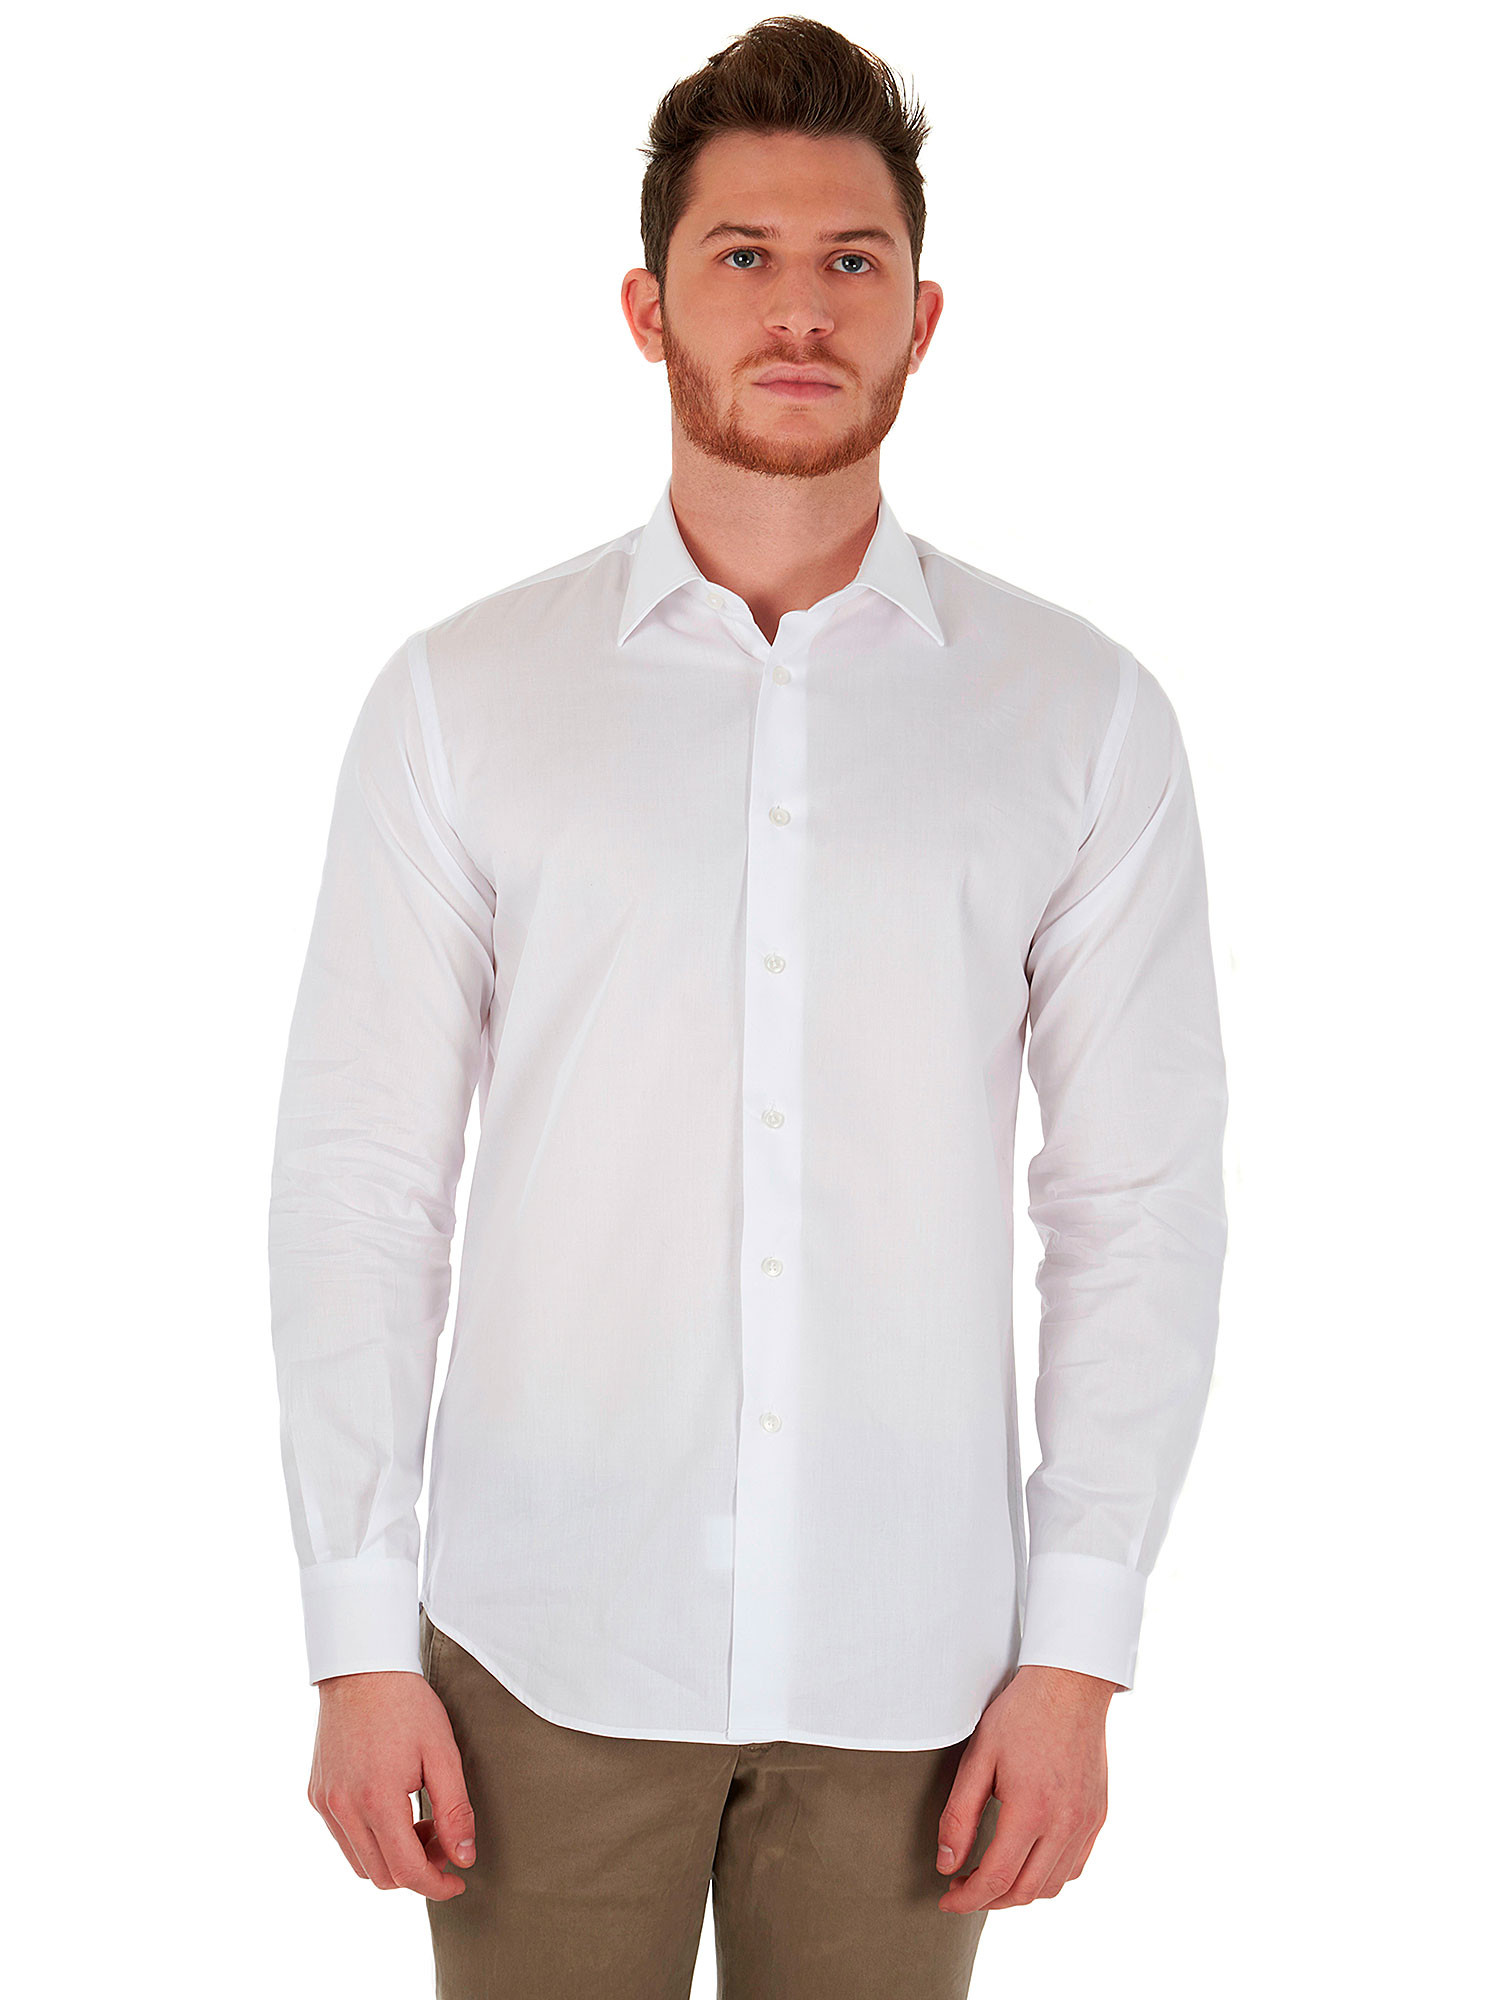 White men shirt classic style Comfort it by Marcus